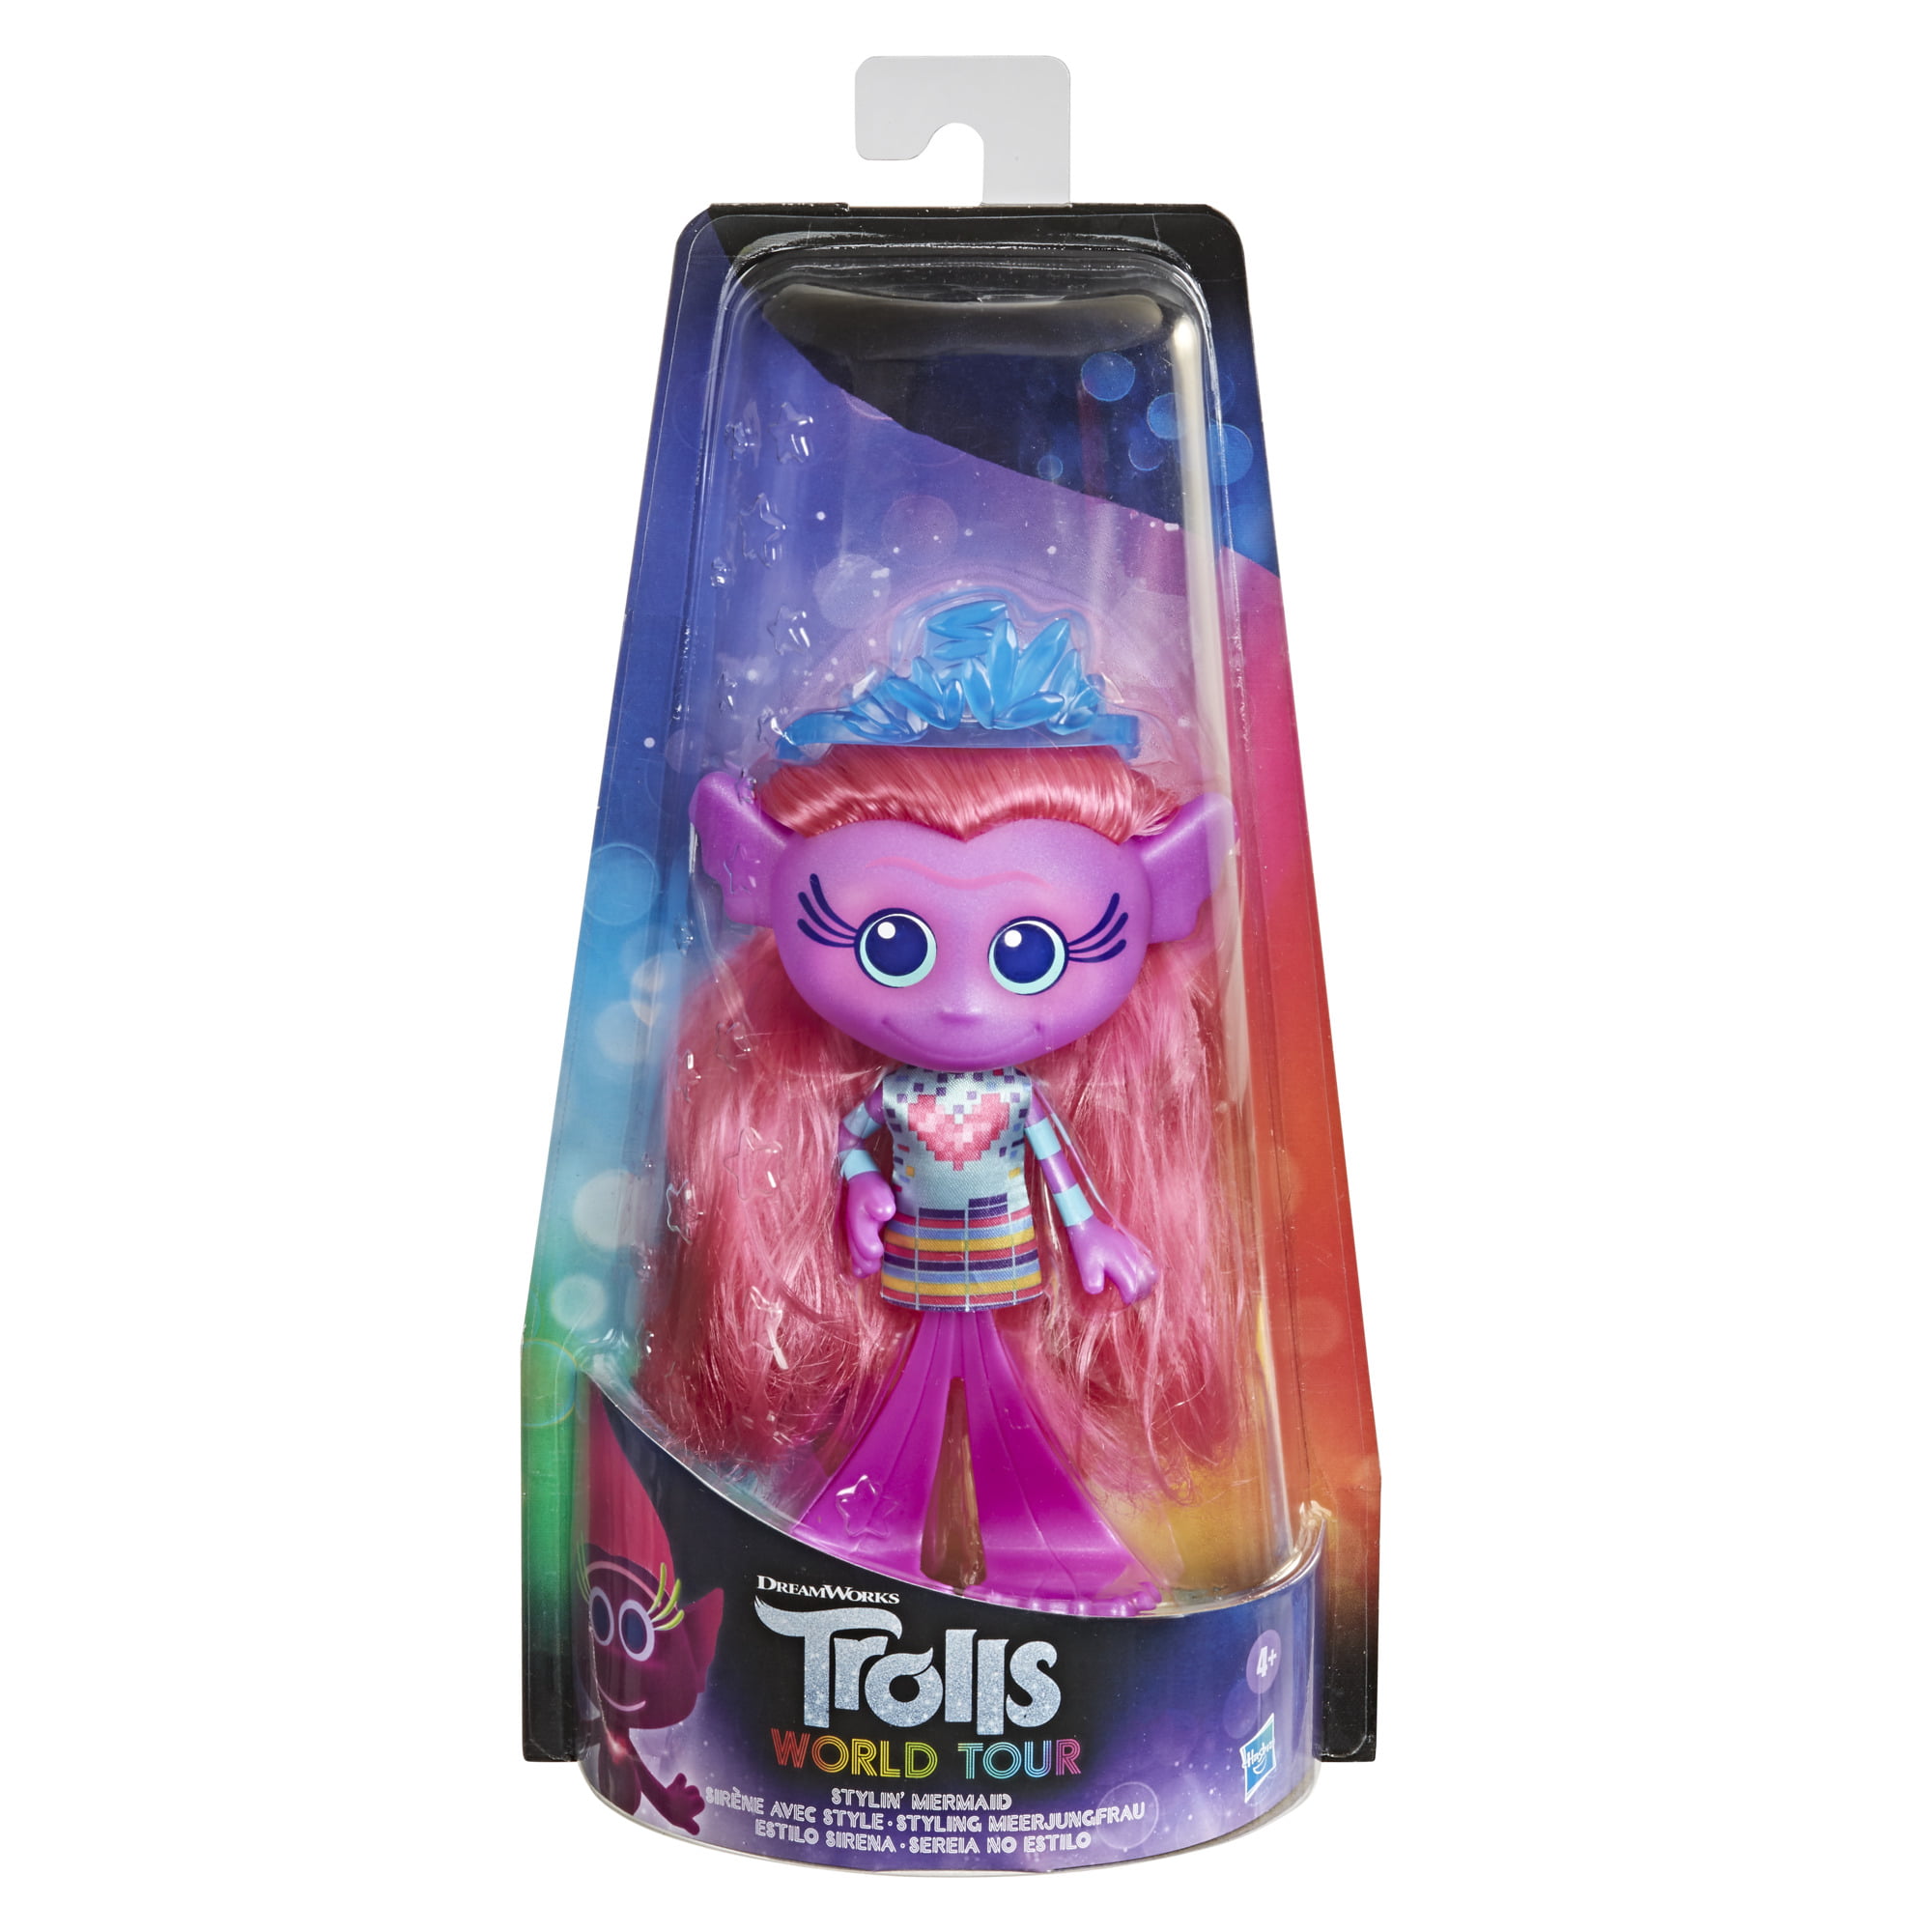 DreamWorks Trolls World Tour Mermaid Collectible Doll E7043 Toy Figure for sale online 